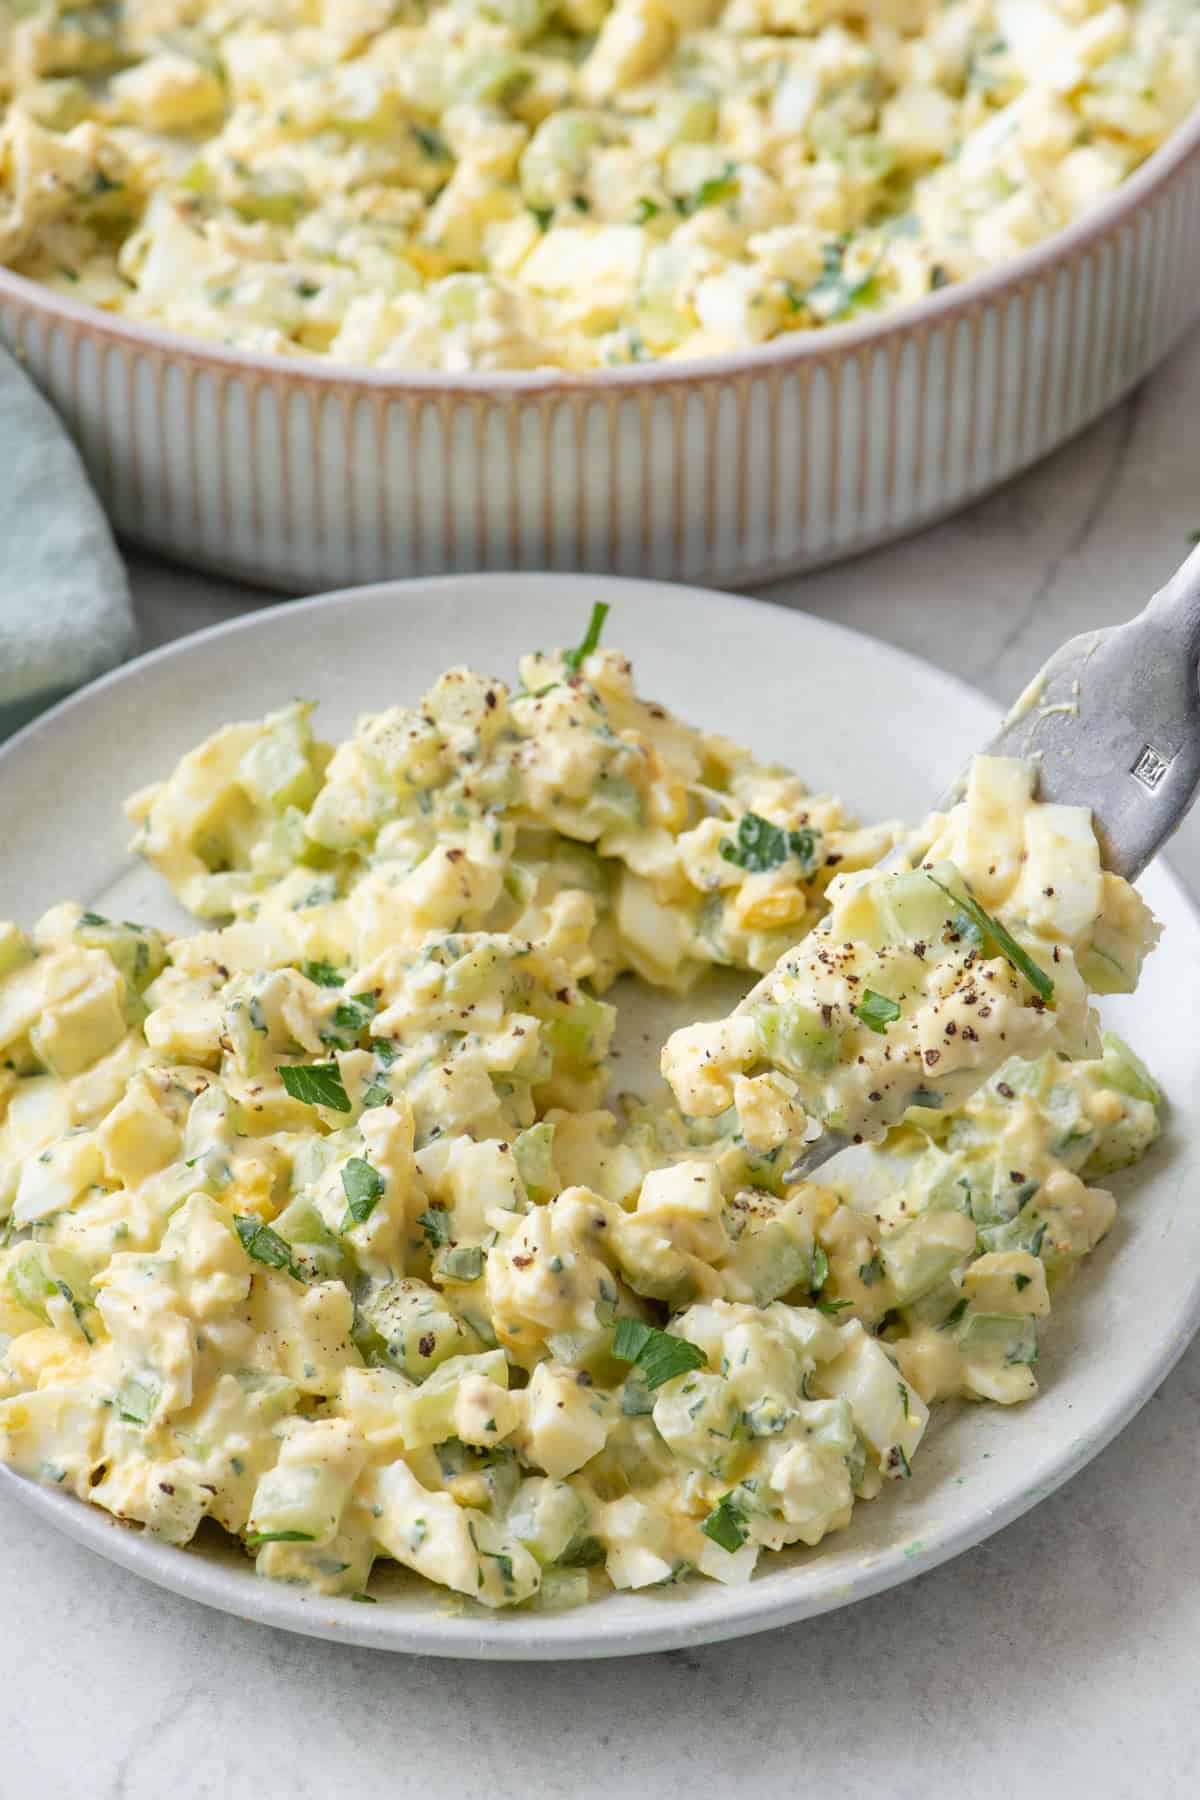 My recipe for Healthy Egg Salad is perfect for lunches. I make it healthier by replacing the mayo with greek yogurt. It's fast, full of flavor and filling!